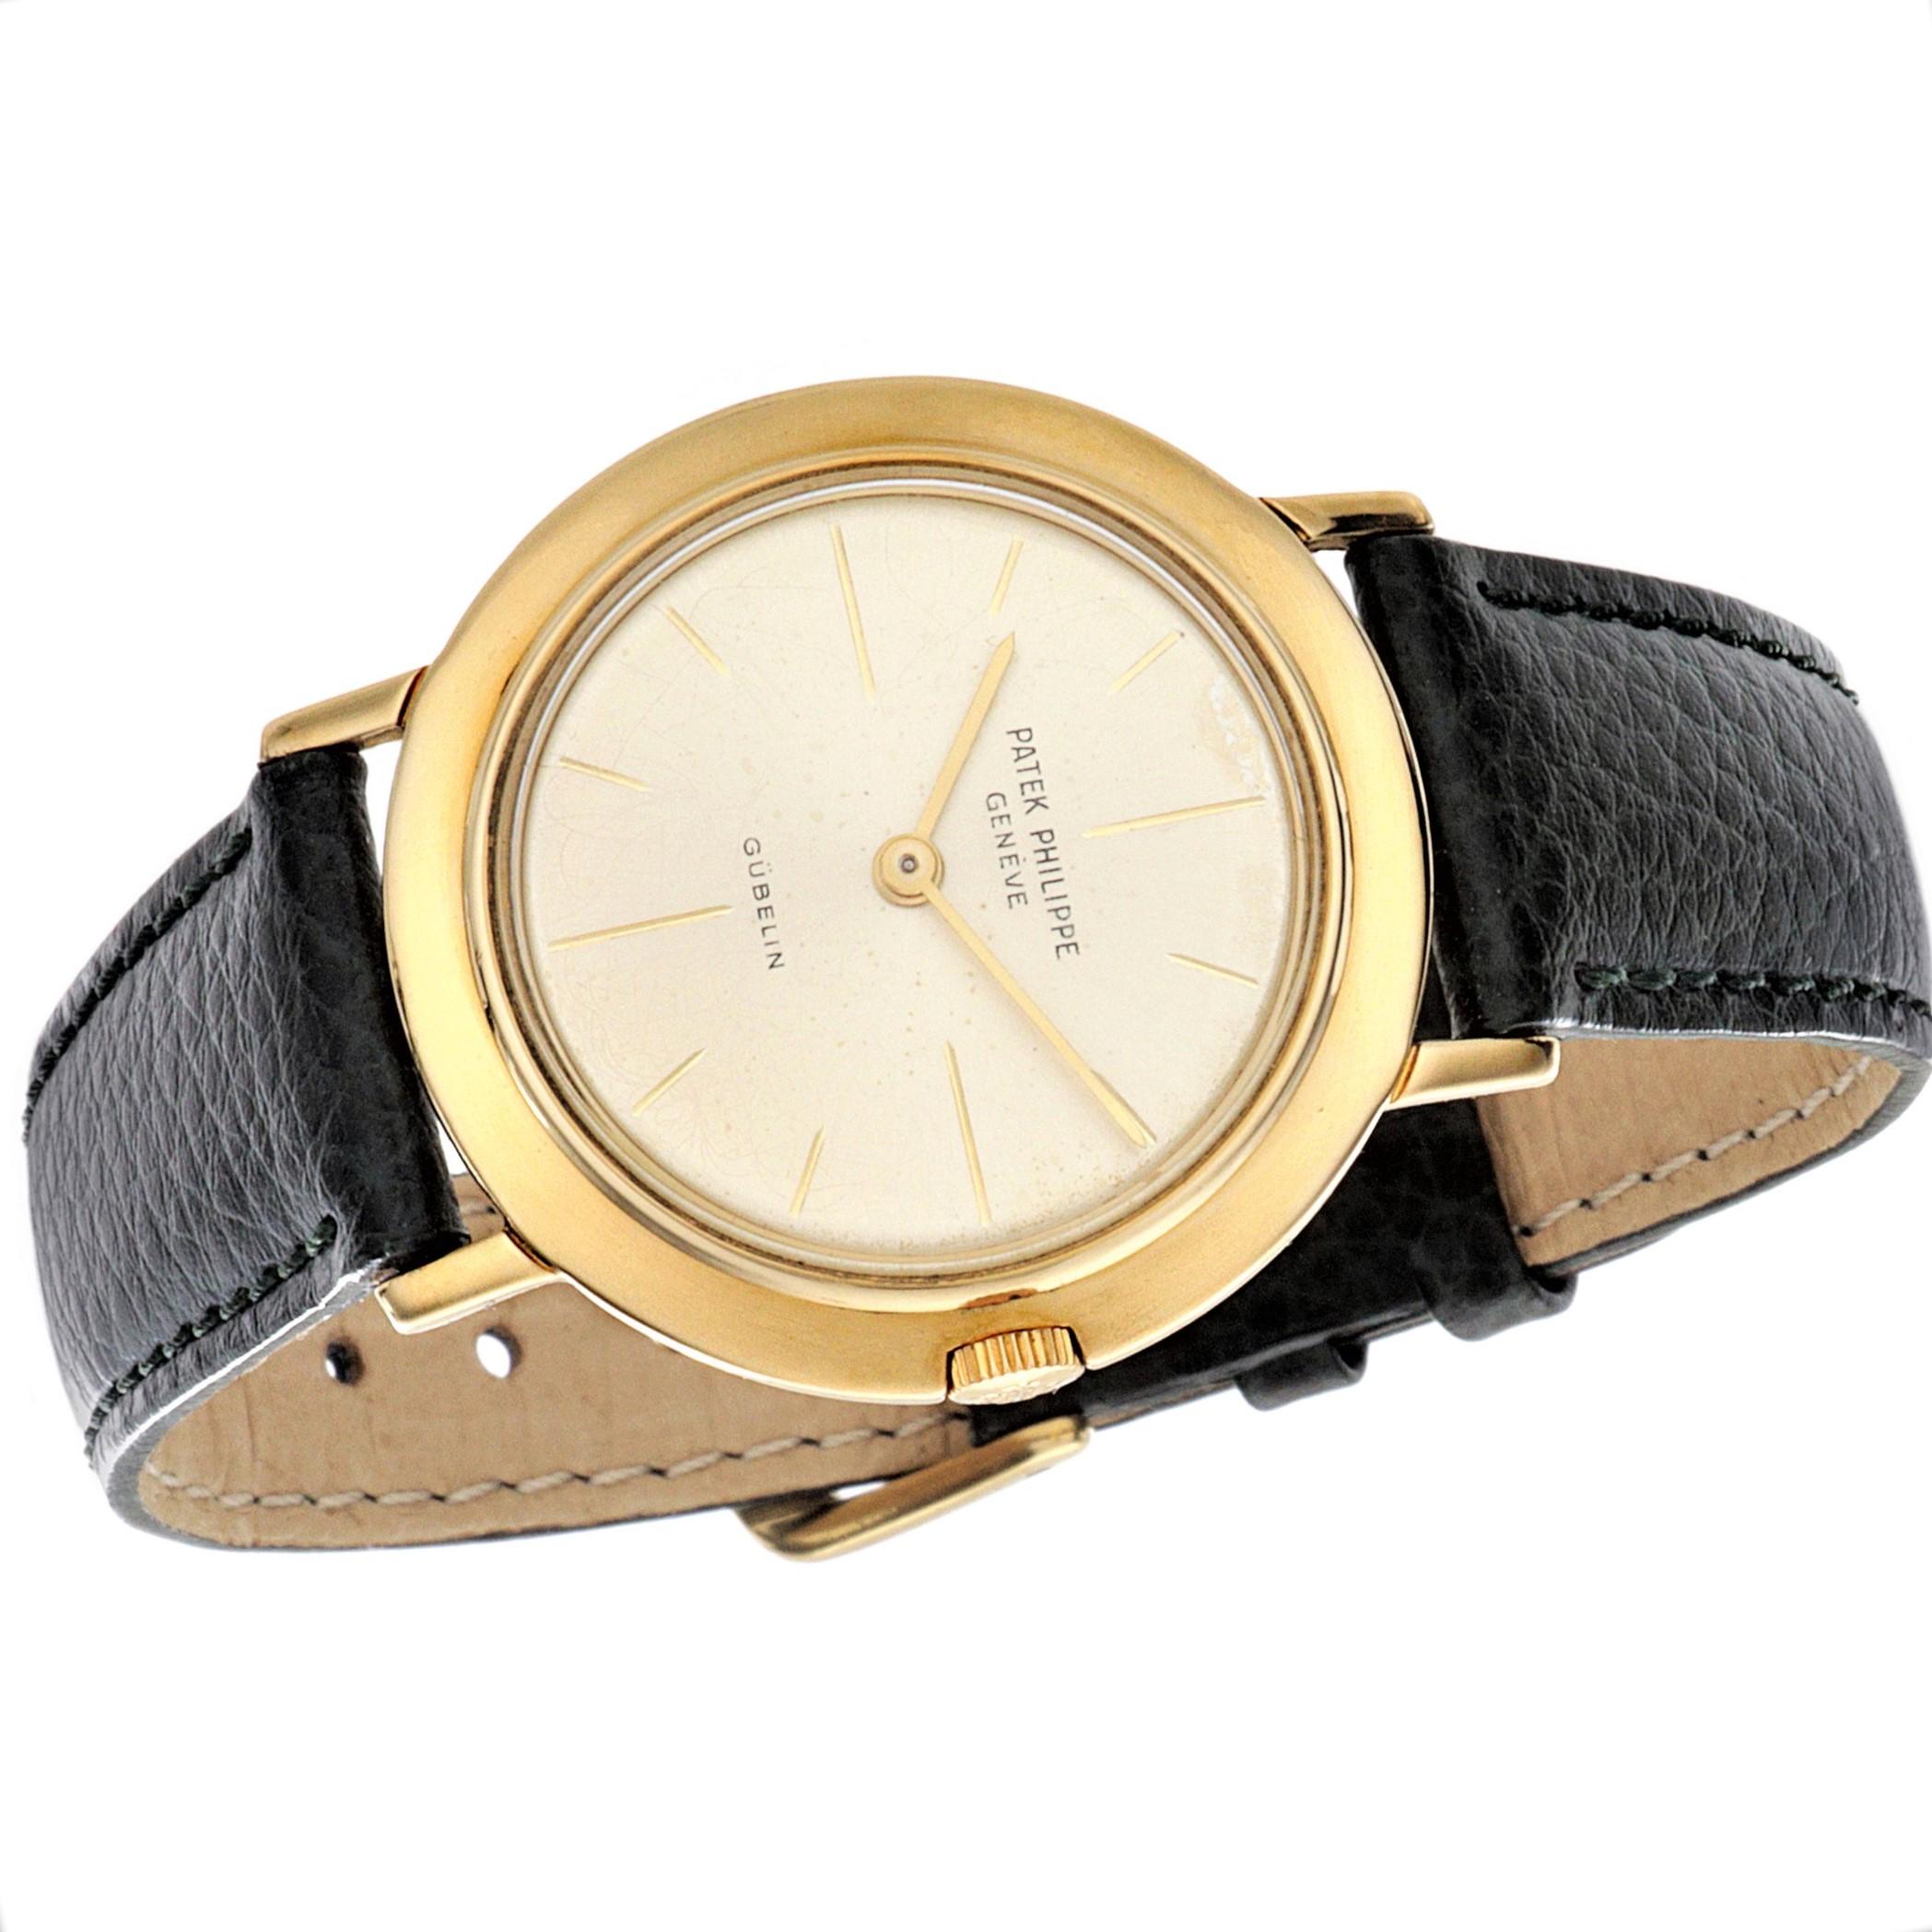 Patek Philippe 2595J Vintage Calatrava, Retailed by Gueblin in Zurich.  The watch is made in 18K Yellow Gold and measures 32mm in diameter, and was made in the late 1950's approximately 1957.  The watch is fitted with a 23-300 caliber movement